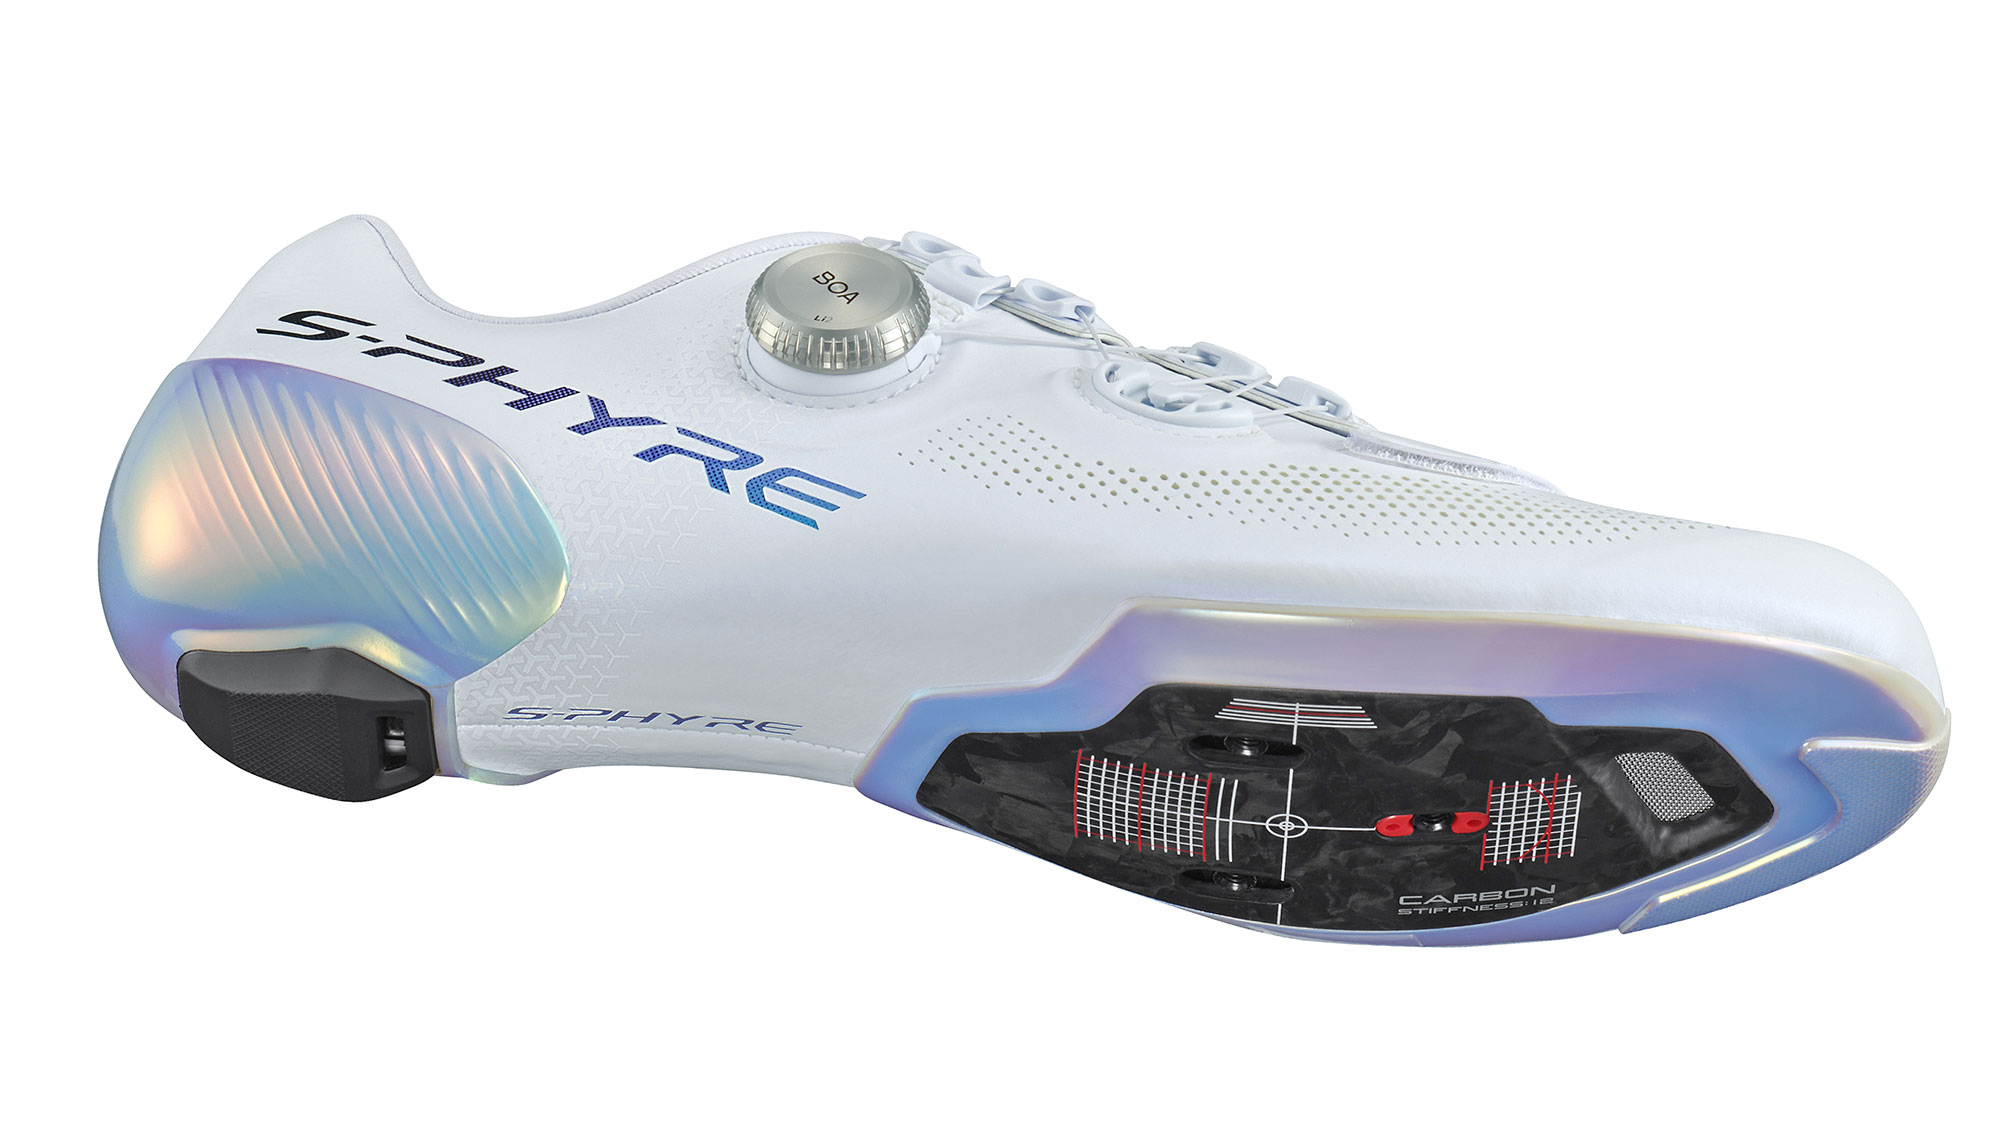 Shimano S-Phyre RC9 PWR, updated RC903PWR road bike shoes for sprinters, time-trialists & track racers, carbon sole